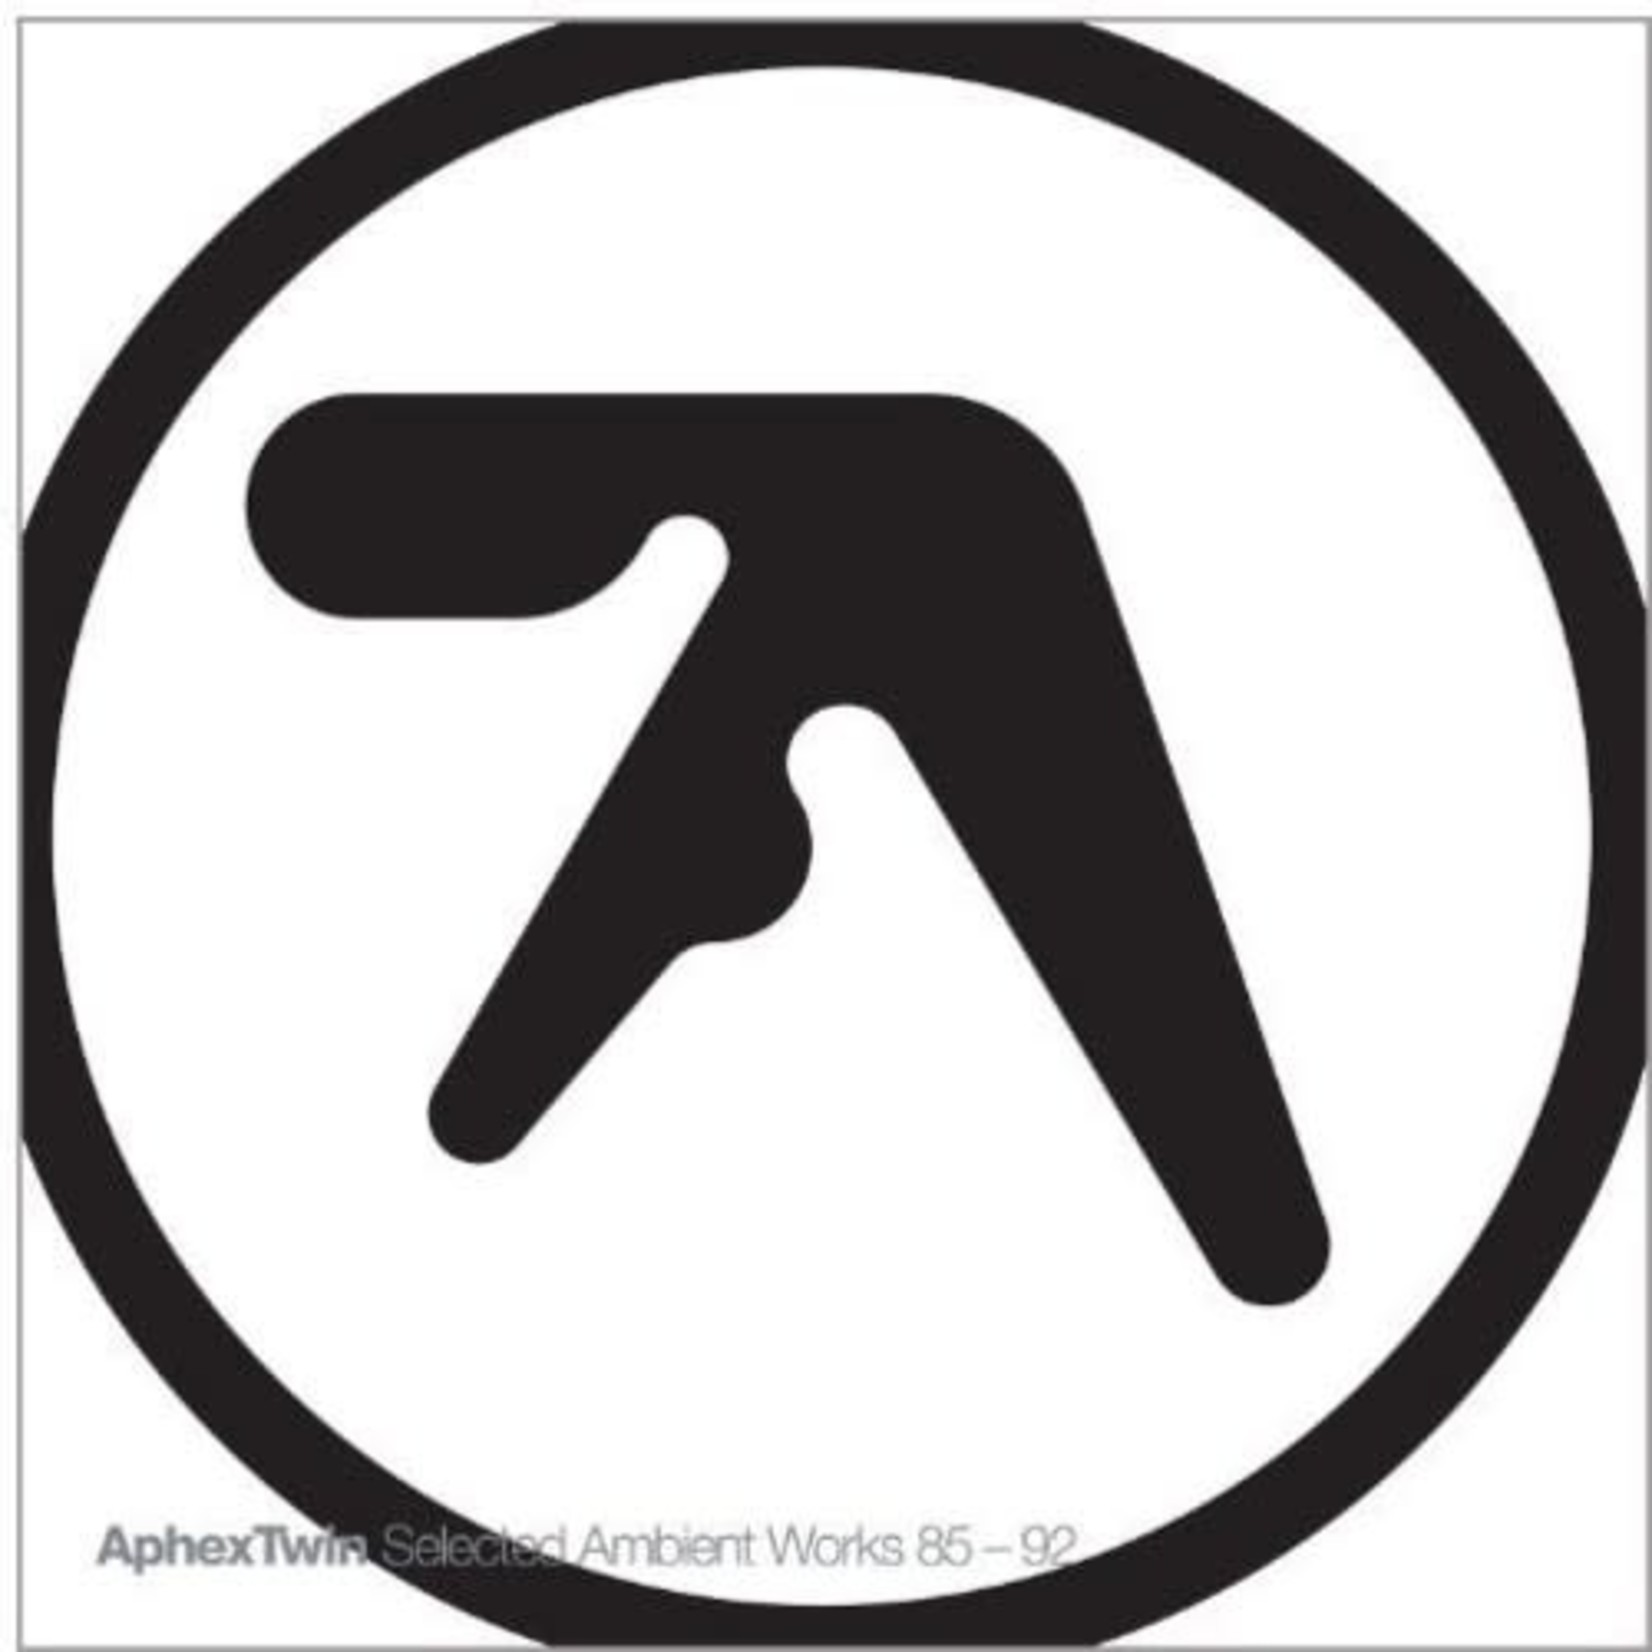 Aphex Twin - Selected Ambient Works 85-92 [CD]